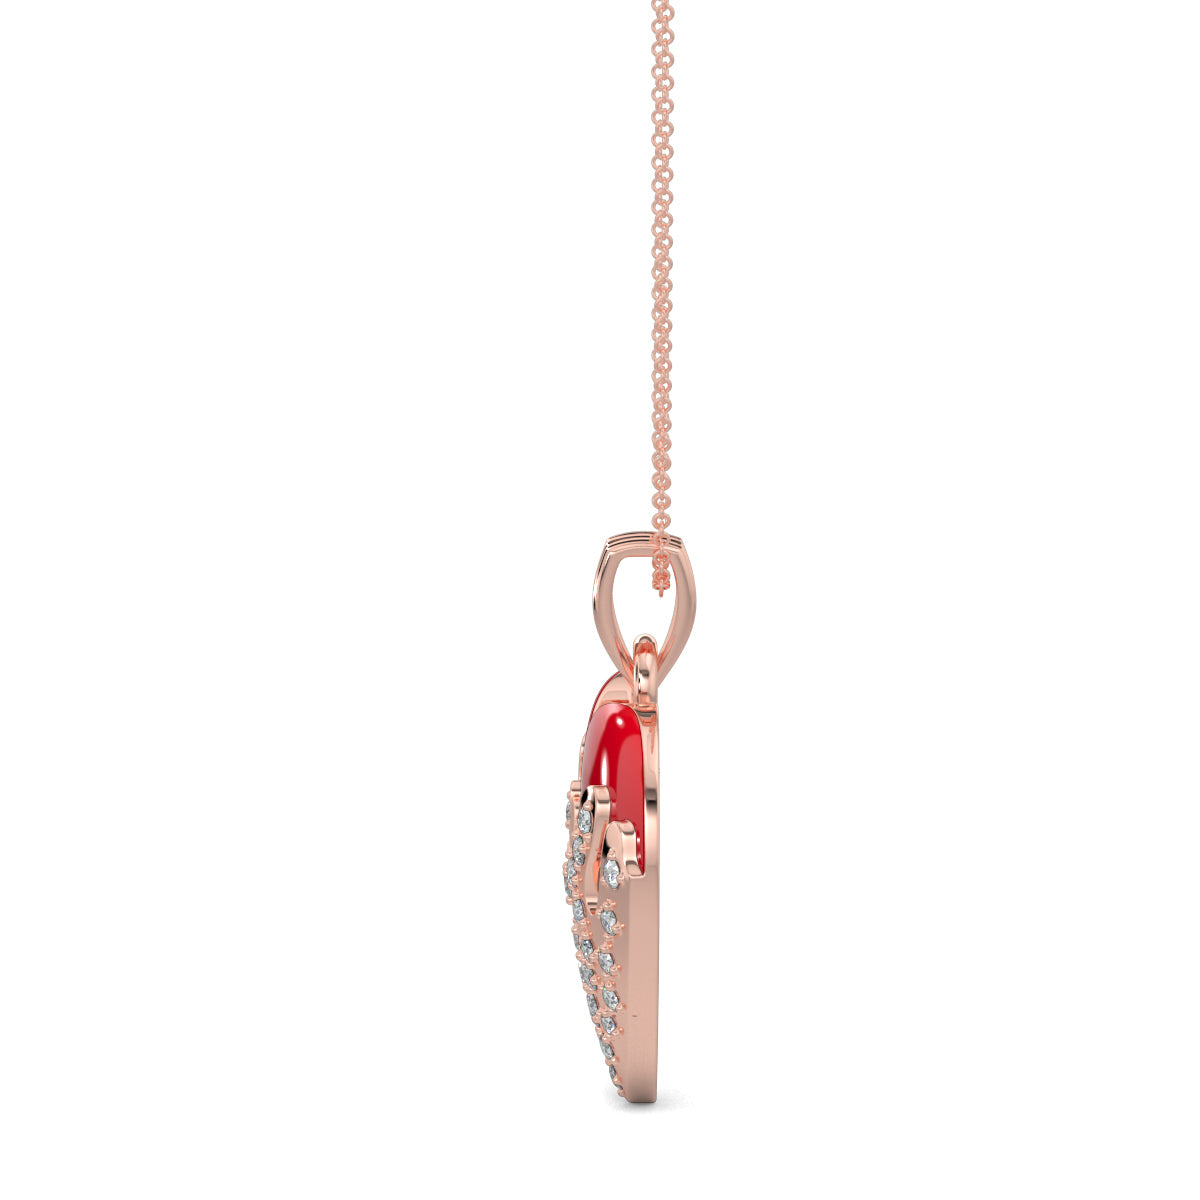 Rose Gold, Diamond Pendants, natural diamond pendant, lab-grown diamond pendant, Eternal Flame Flicker Pendant from Forever Yours Collection, Heart-shaped Pendant, Casual Diamond Pendant, Red Enamel, Everyday Jewelry, Flame-inspired Designnt